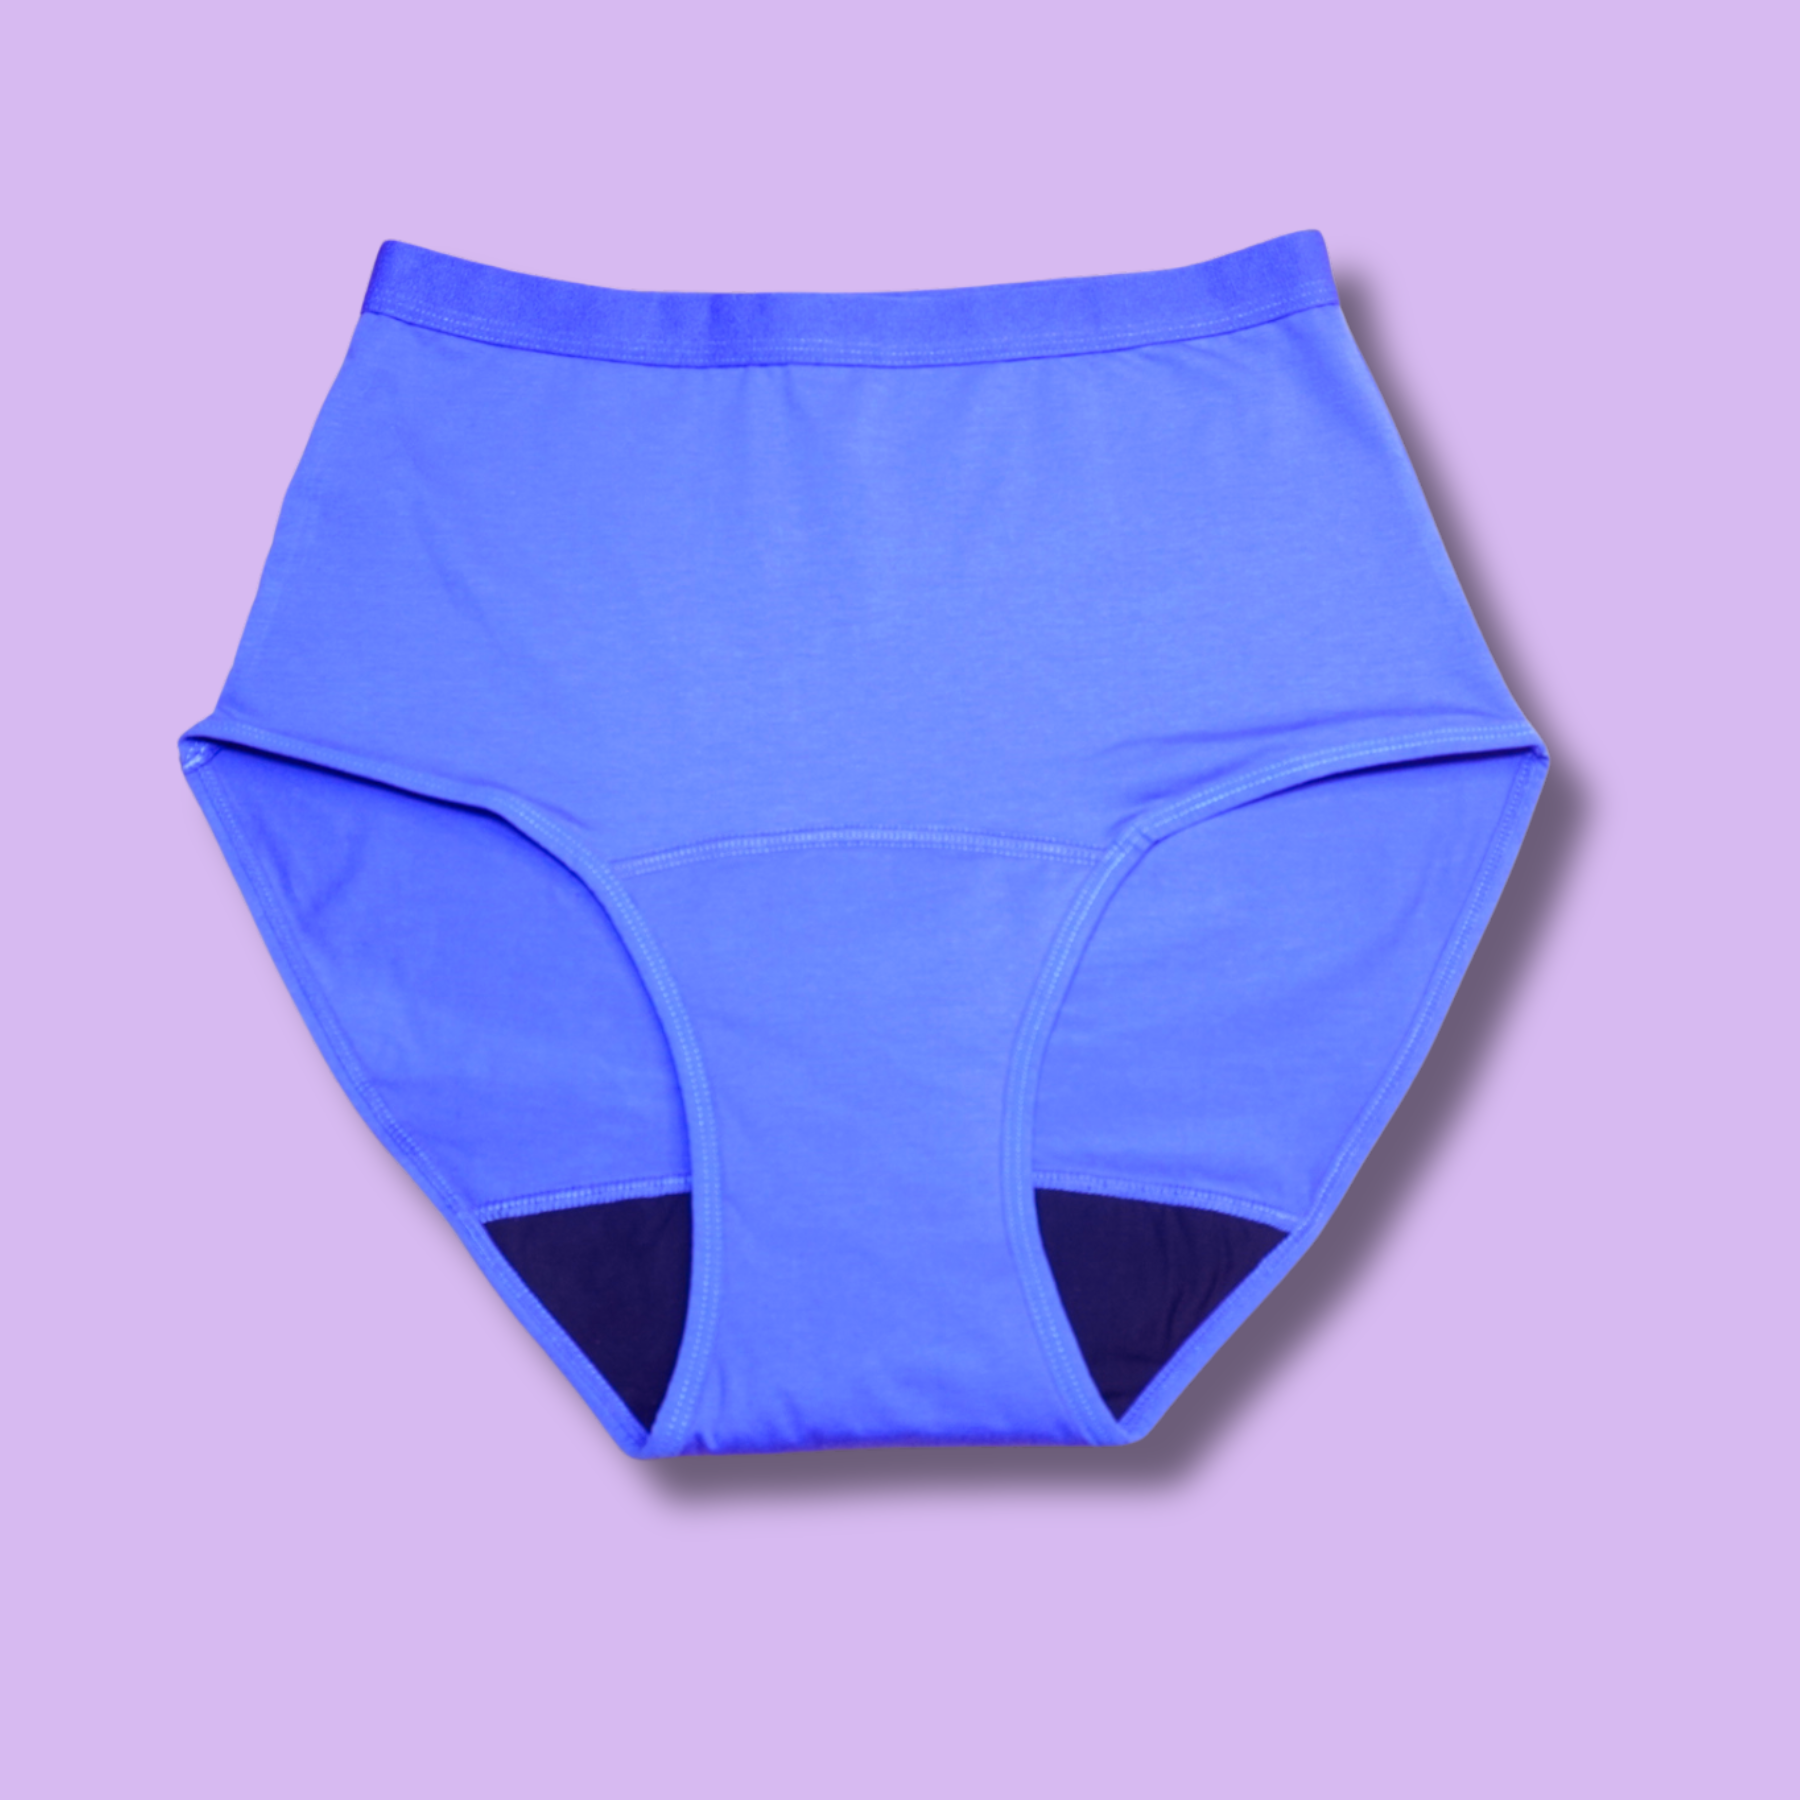 The Perfect Natural Period Pairing: Period Underwear + Menstrual Cup